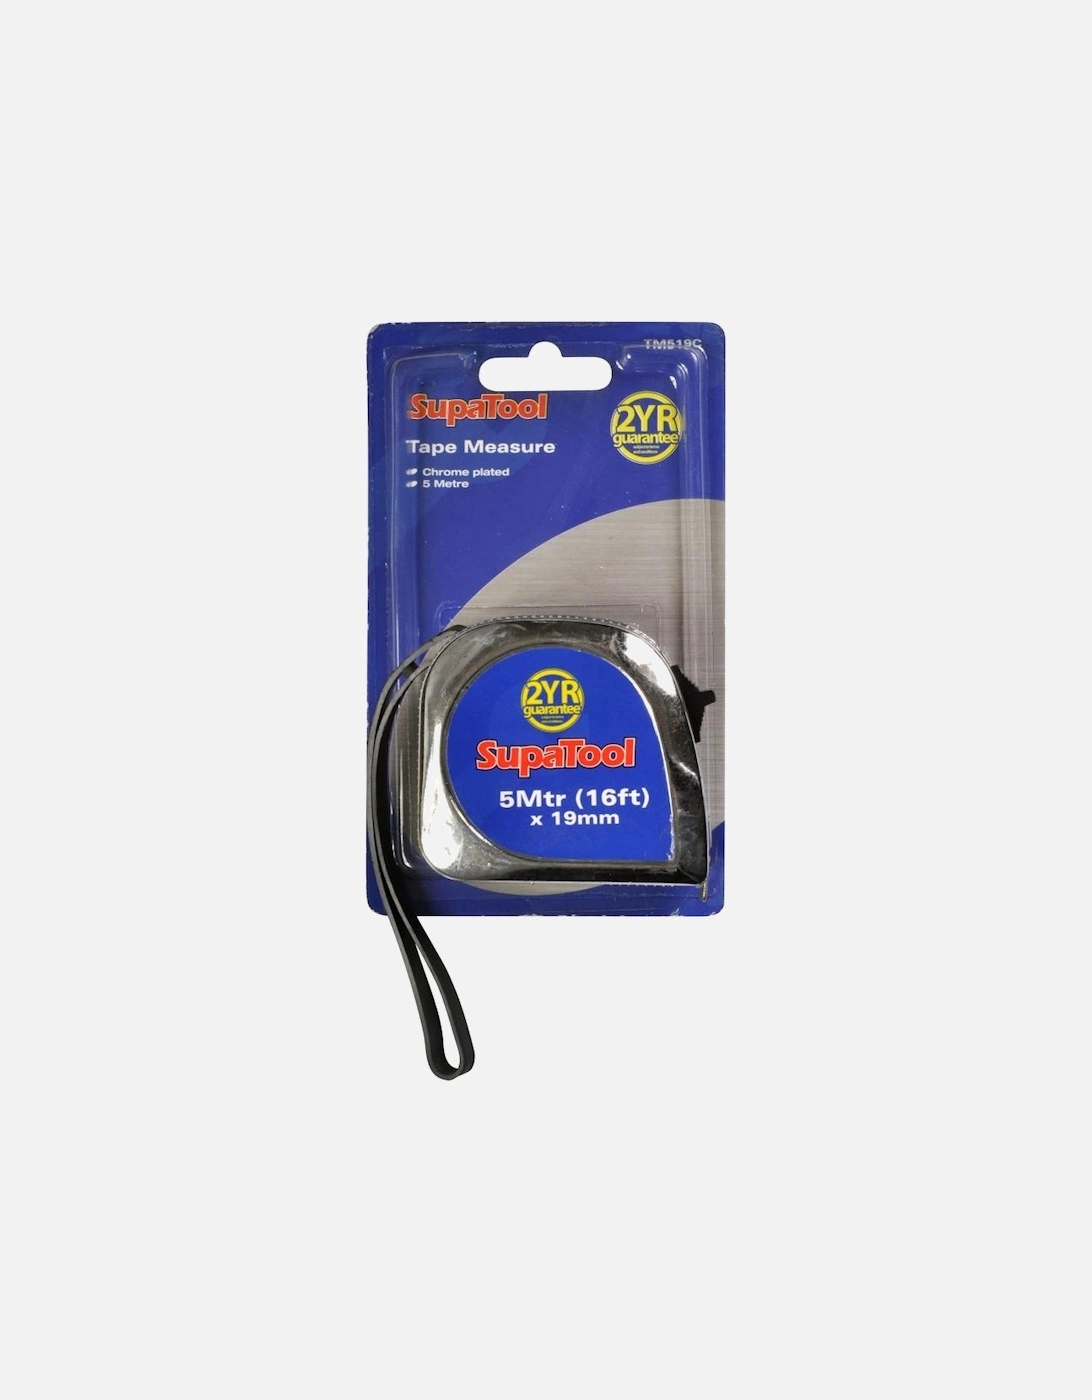 Chrome Plated Tape Measure, 2 of 1